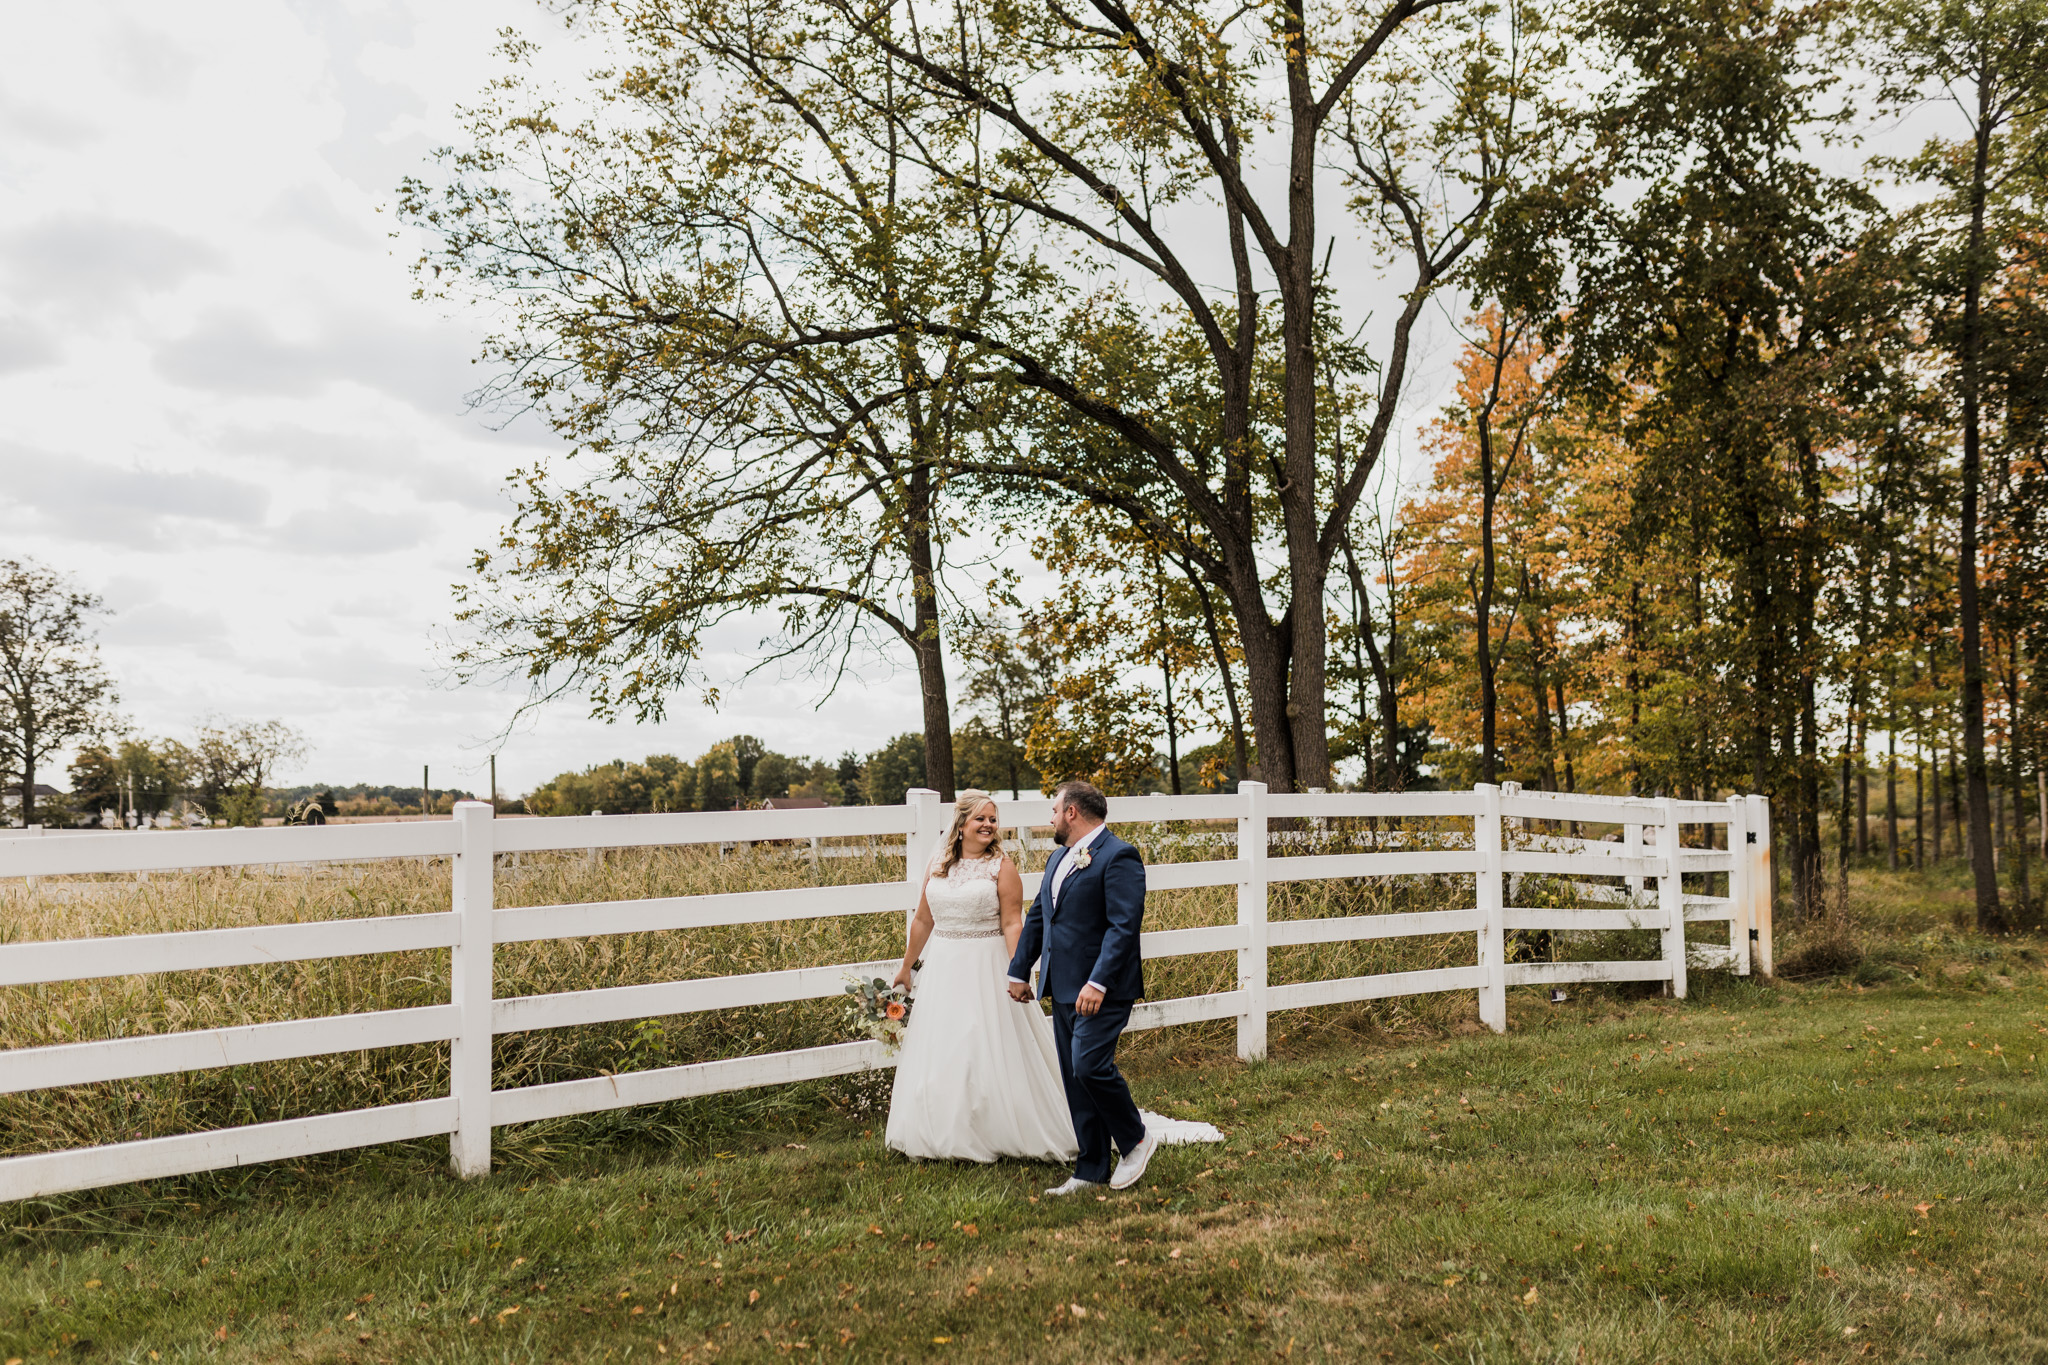 A bride and groom walk along the fence of a horse farm pasture during their Indiana wedding.